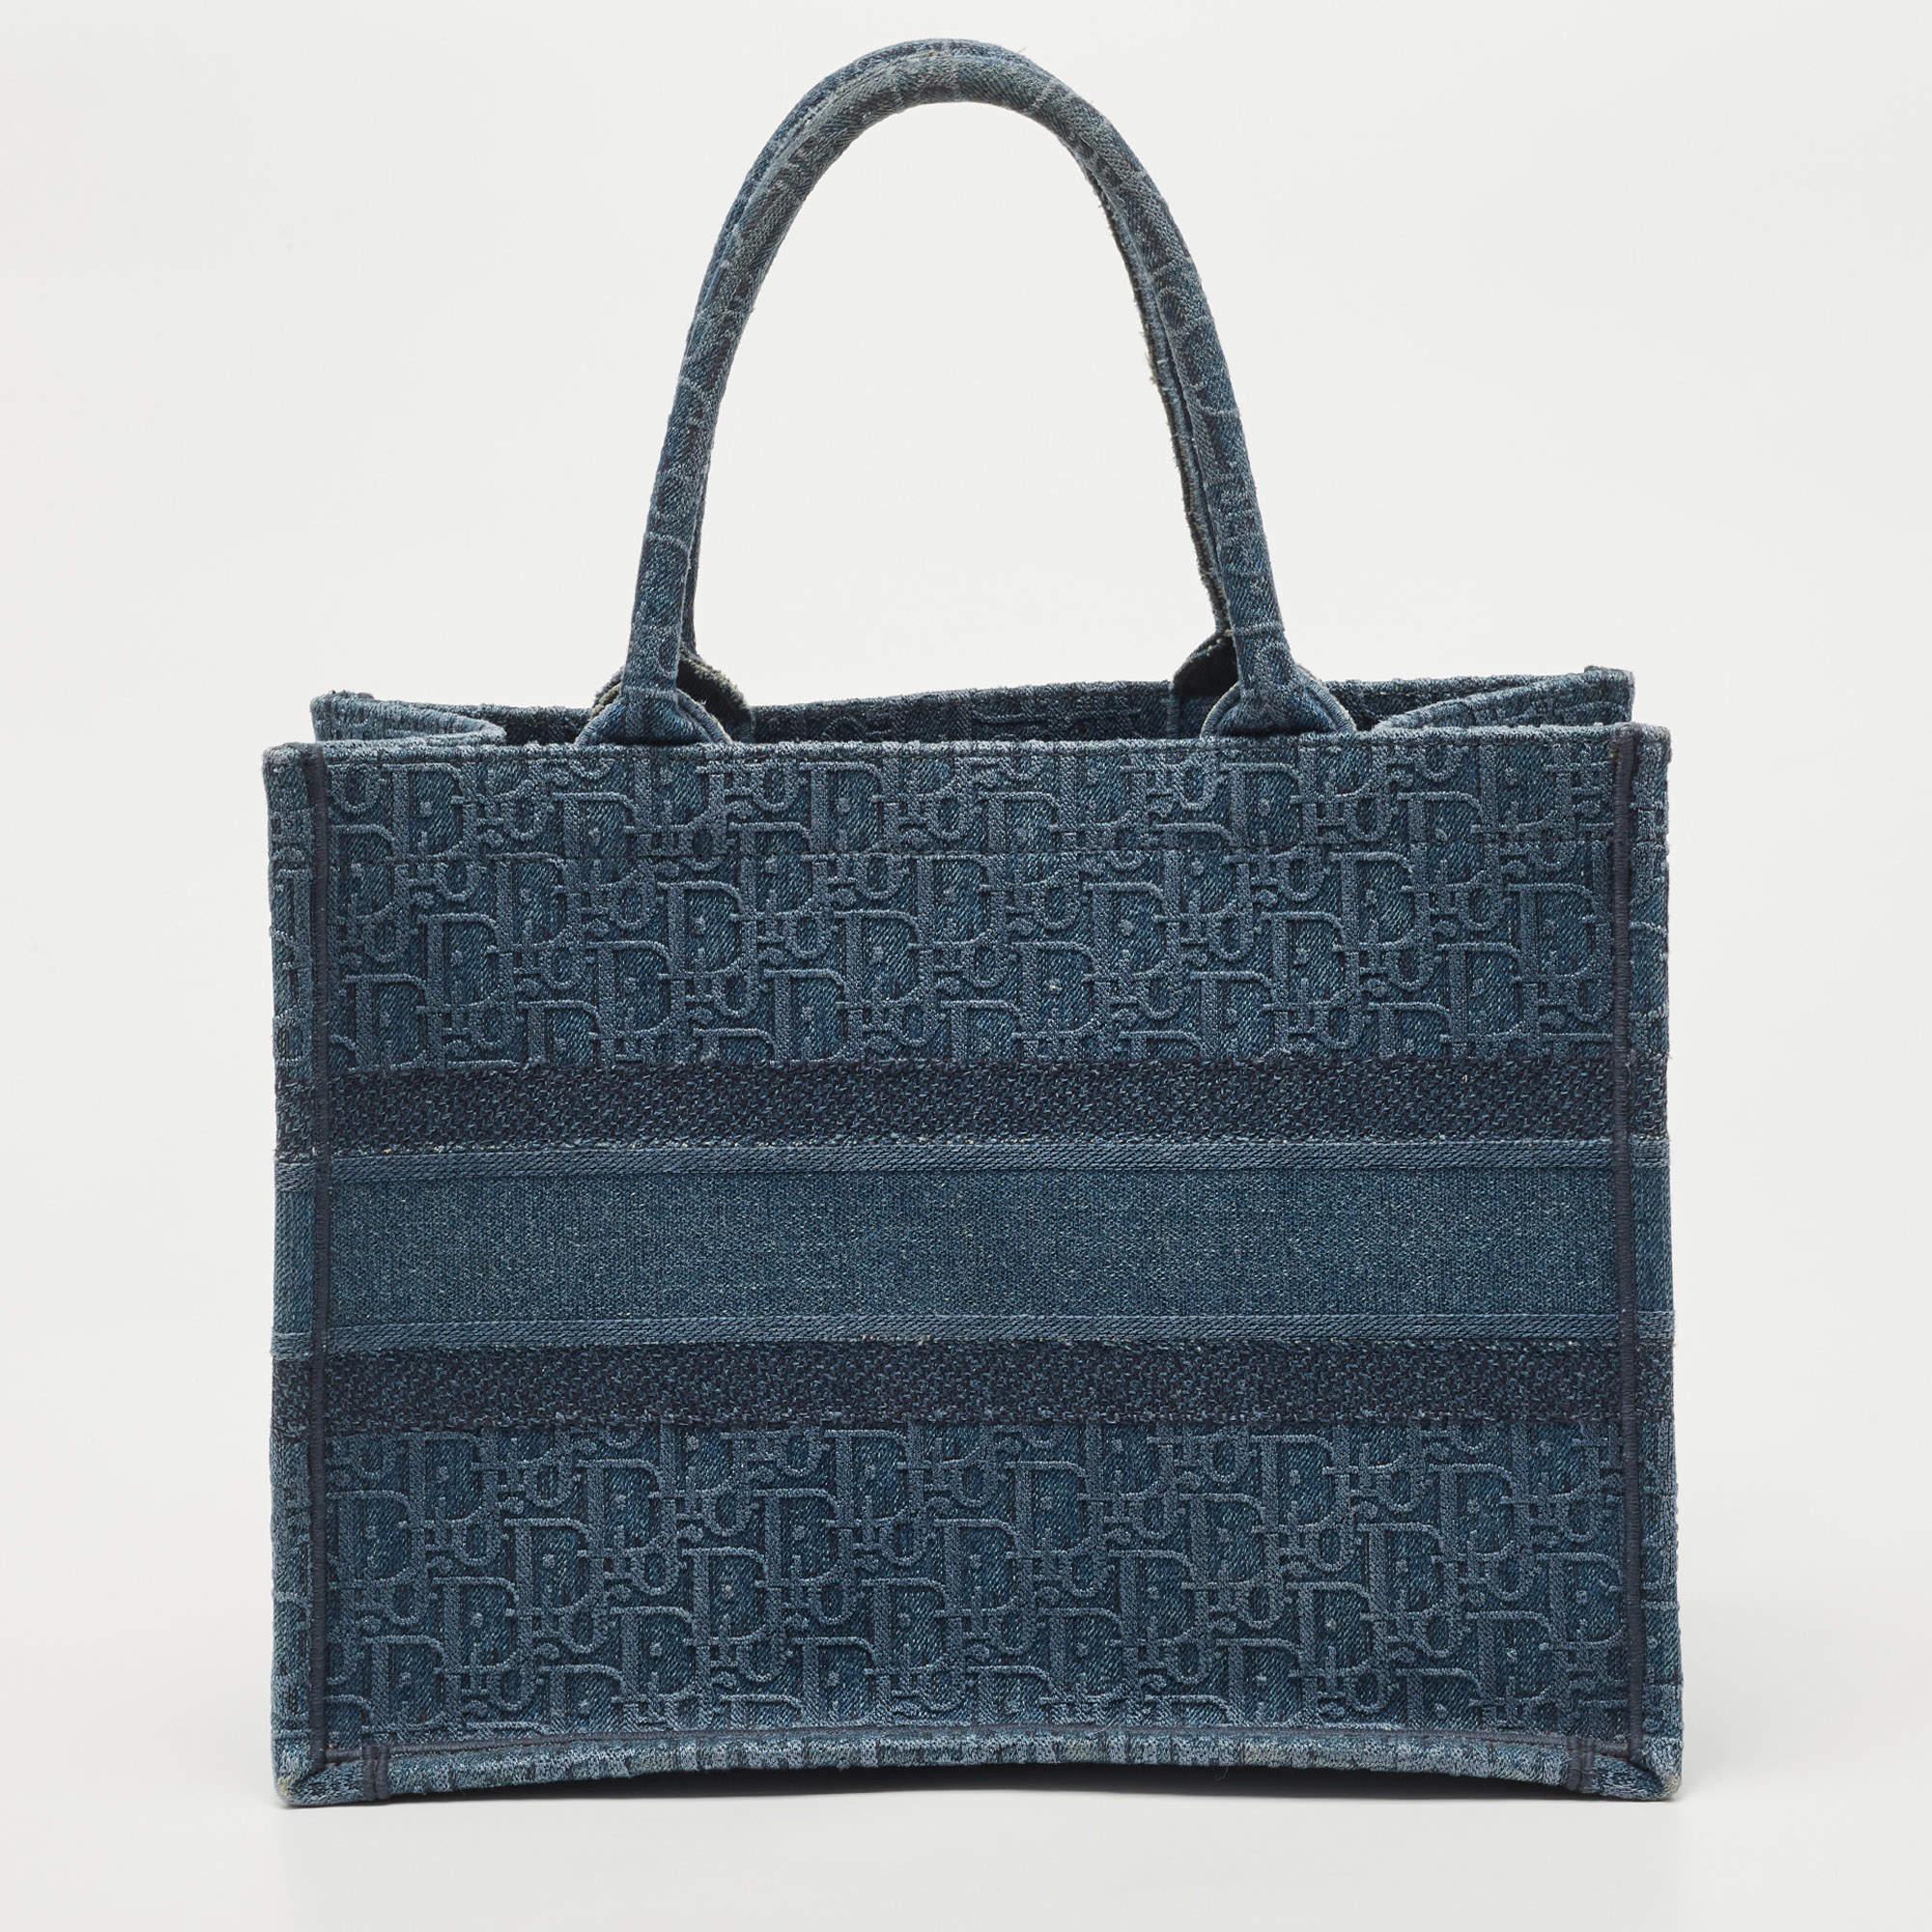 Designed by Maria Grazia Chiuri, the Dior Book Tote is a travel accessory for people with style. The bag here is crafted using denim into a beautiful structure and covered in Oblique embroidery. Two handles, the 'Christian Dior' signature, and a